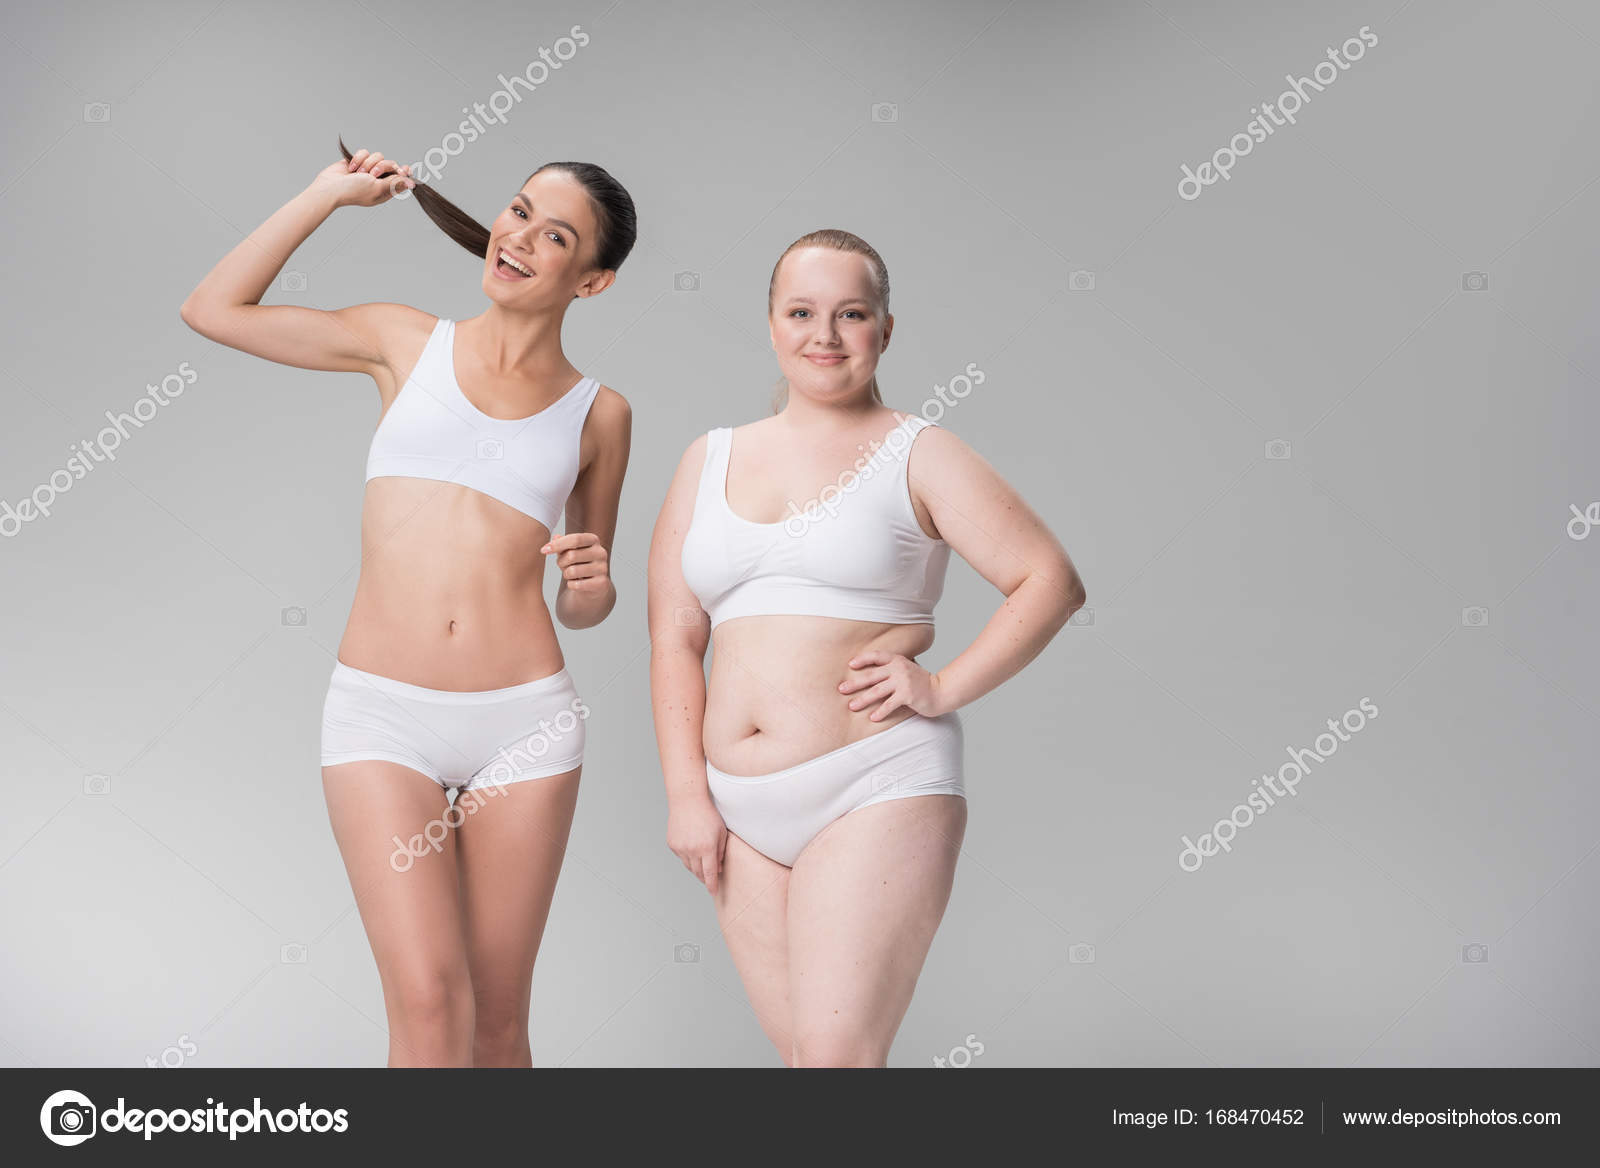 Portrait of two smiling women in great shape wearing tight underwear. They  are hugging and looking at camera with joy. Copy space in right side.  Isolated on background Photos